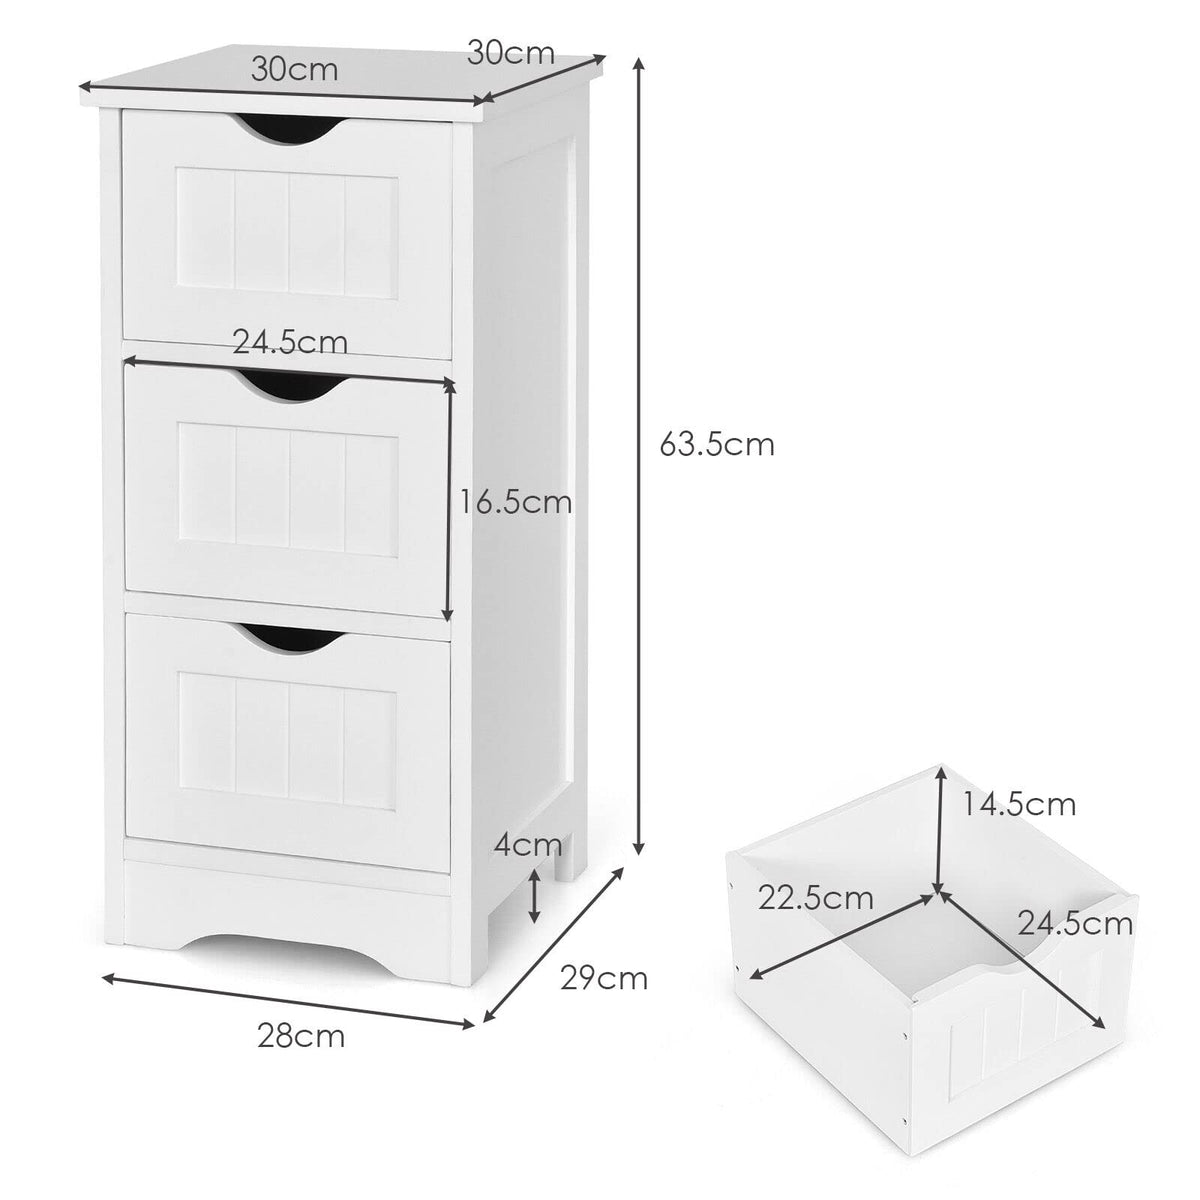 Giantex Bathroom Floor Cabinet, Side Storage Organizer Cabinet with 3 Drawers, Anti-Toppling Kit, White